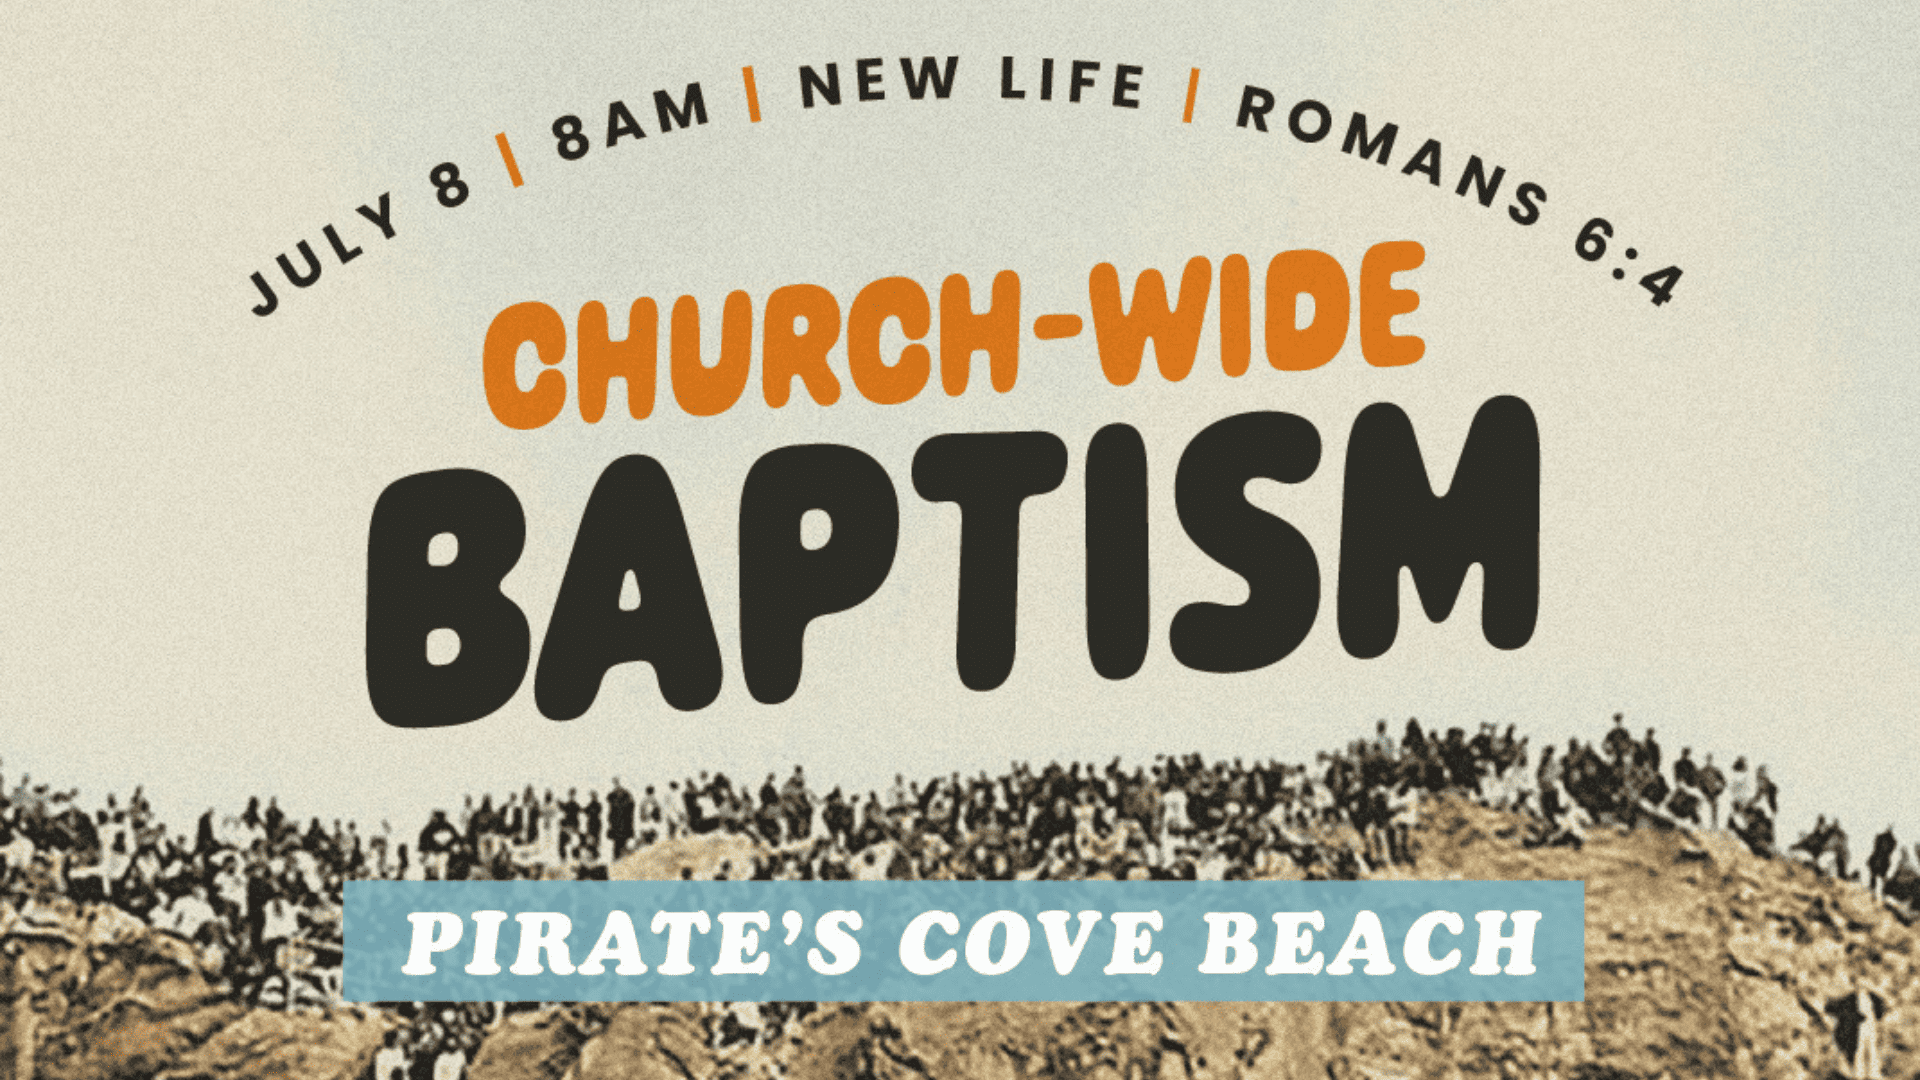 Pirate's Cove Beach Baptism With Greg Laurie event on July 8 at 8 am